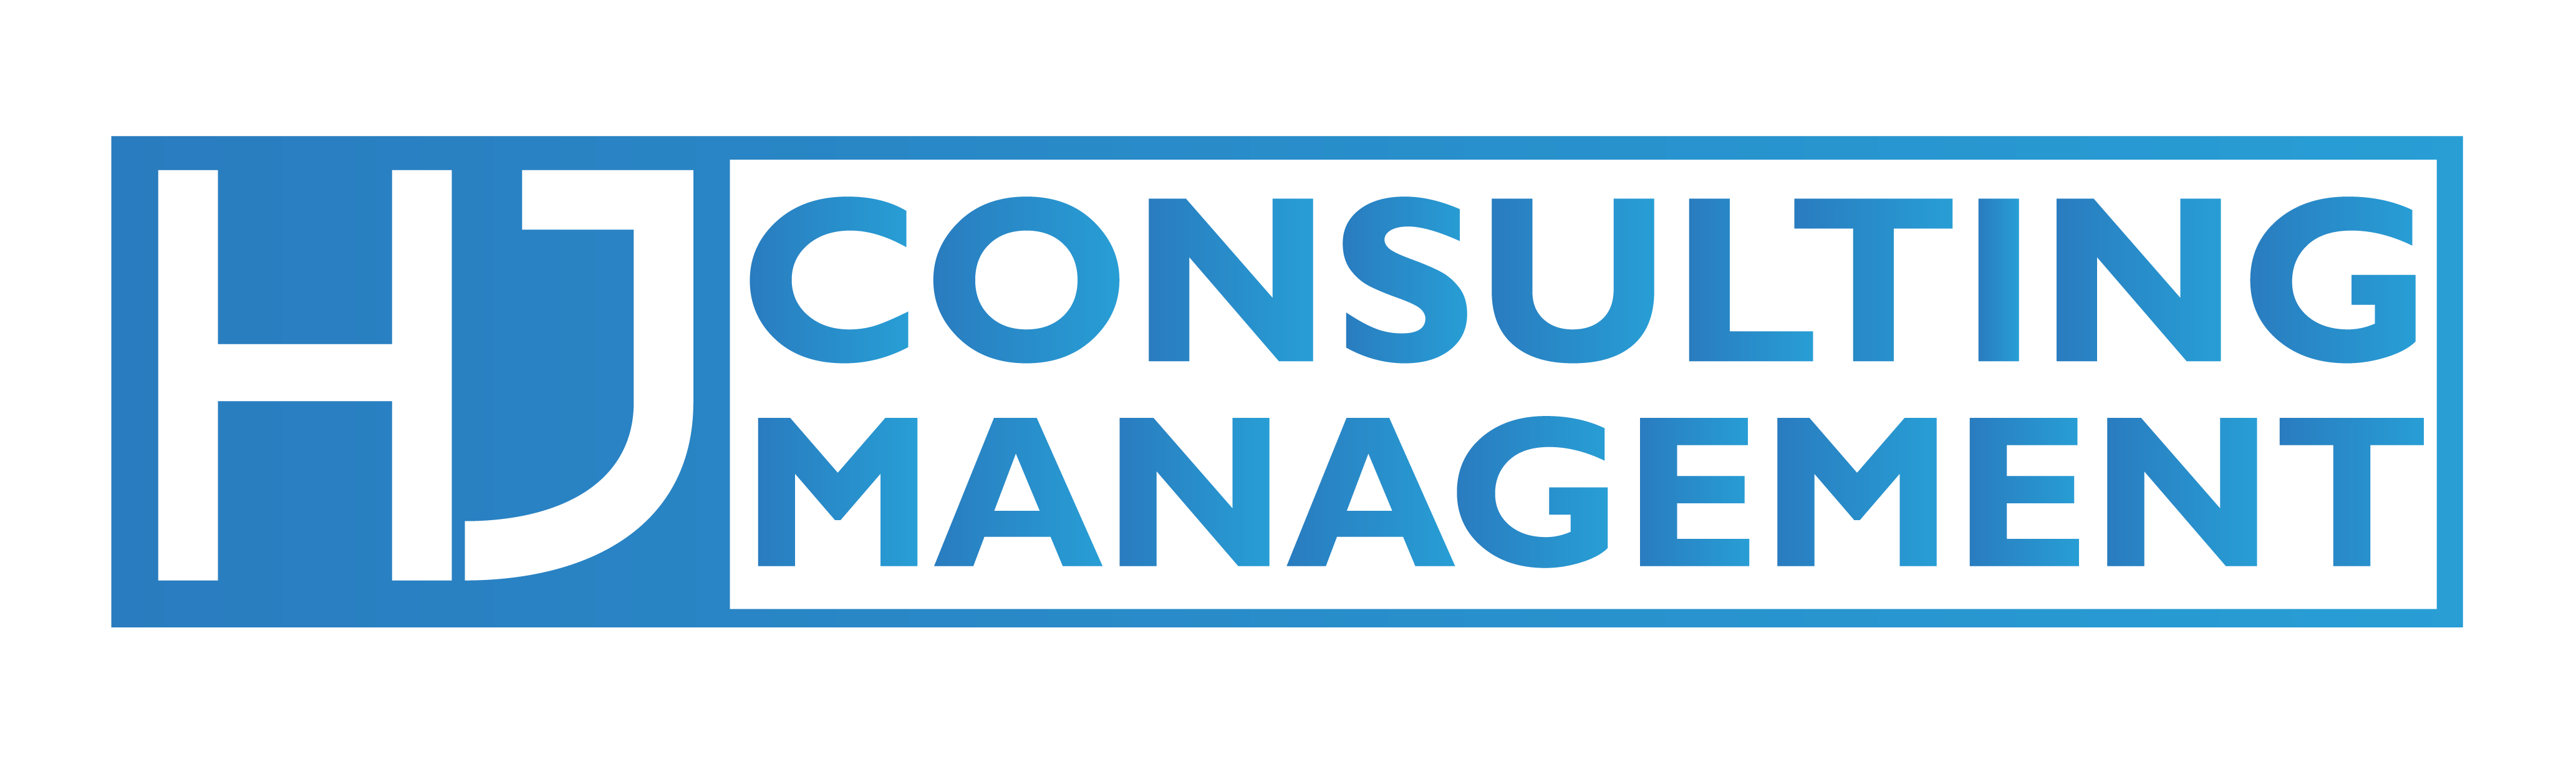 HJ Consulting Management